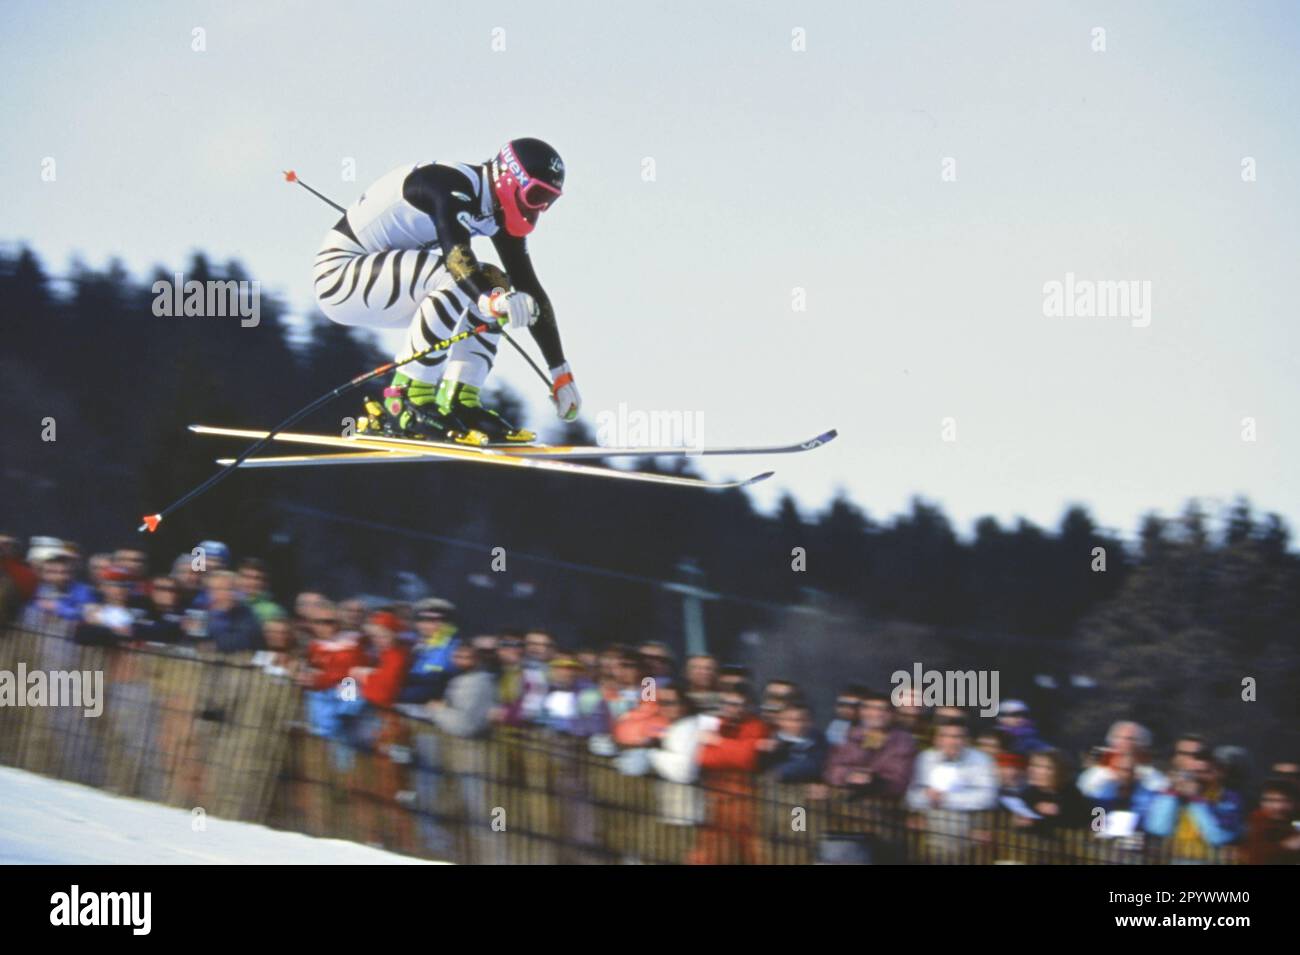 Alpine Skiing World Cup 1991/1992 Kitzbuehel Downhill 18.01.1992 Hannes ZEHENTNER (Germany) PHOTO: WEREK Press Picture Agency xxNOxMODELxRELEASExx [automated translation]- AUSTRIA OUT Stock Photo